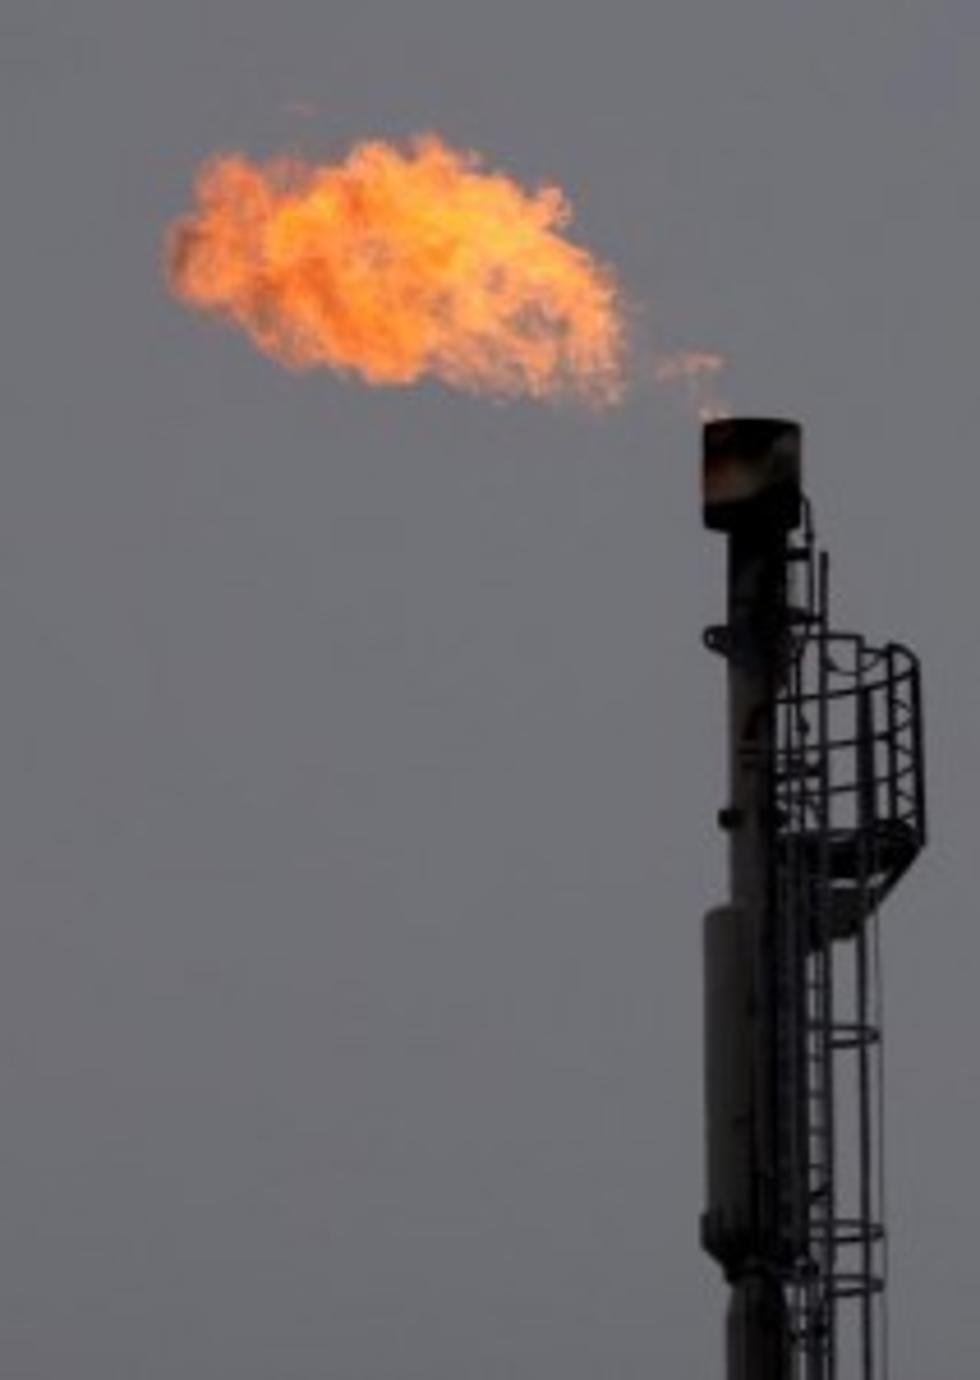 New Gas Flaring Rules